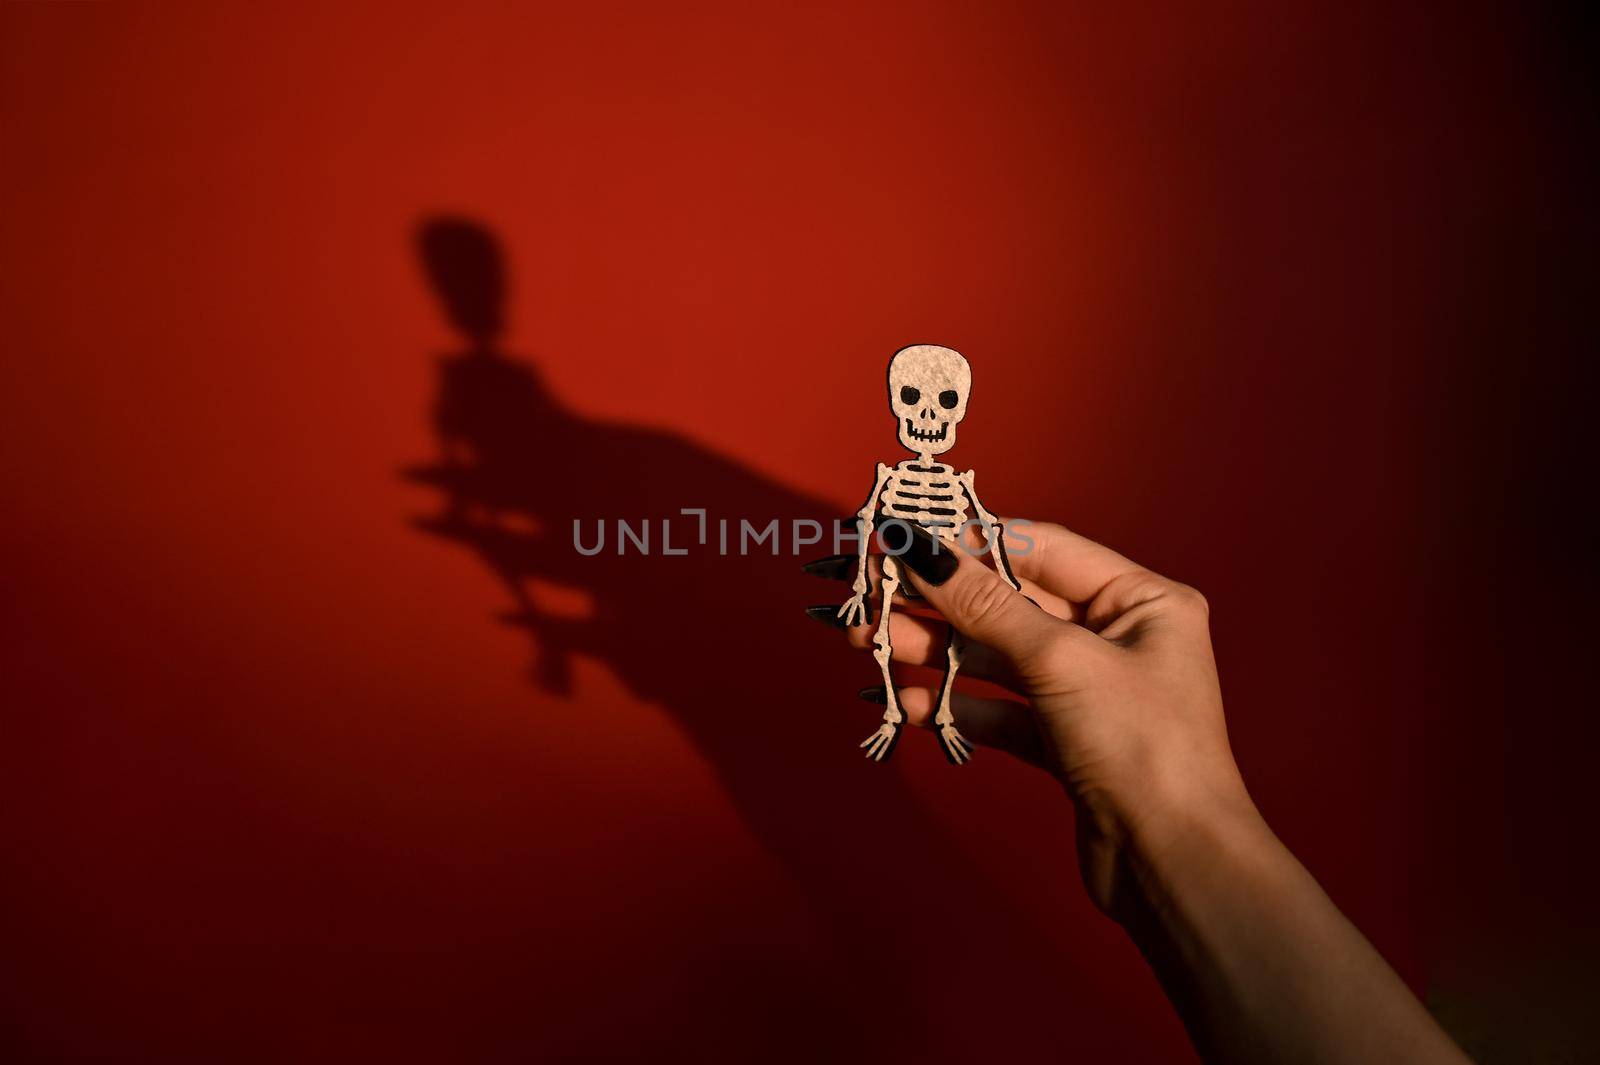 Postcard for Halloween. a human skeleton toy in hand with a shadow on a red background. Halloween symbol. copy space.